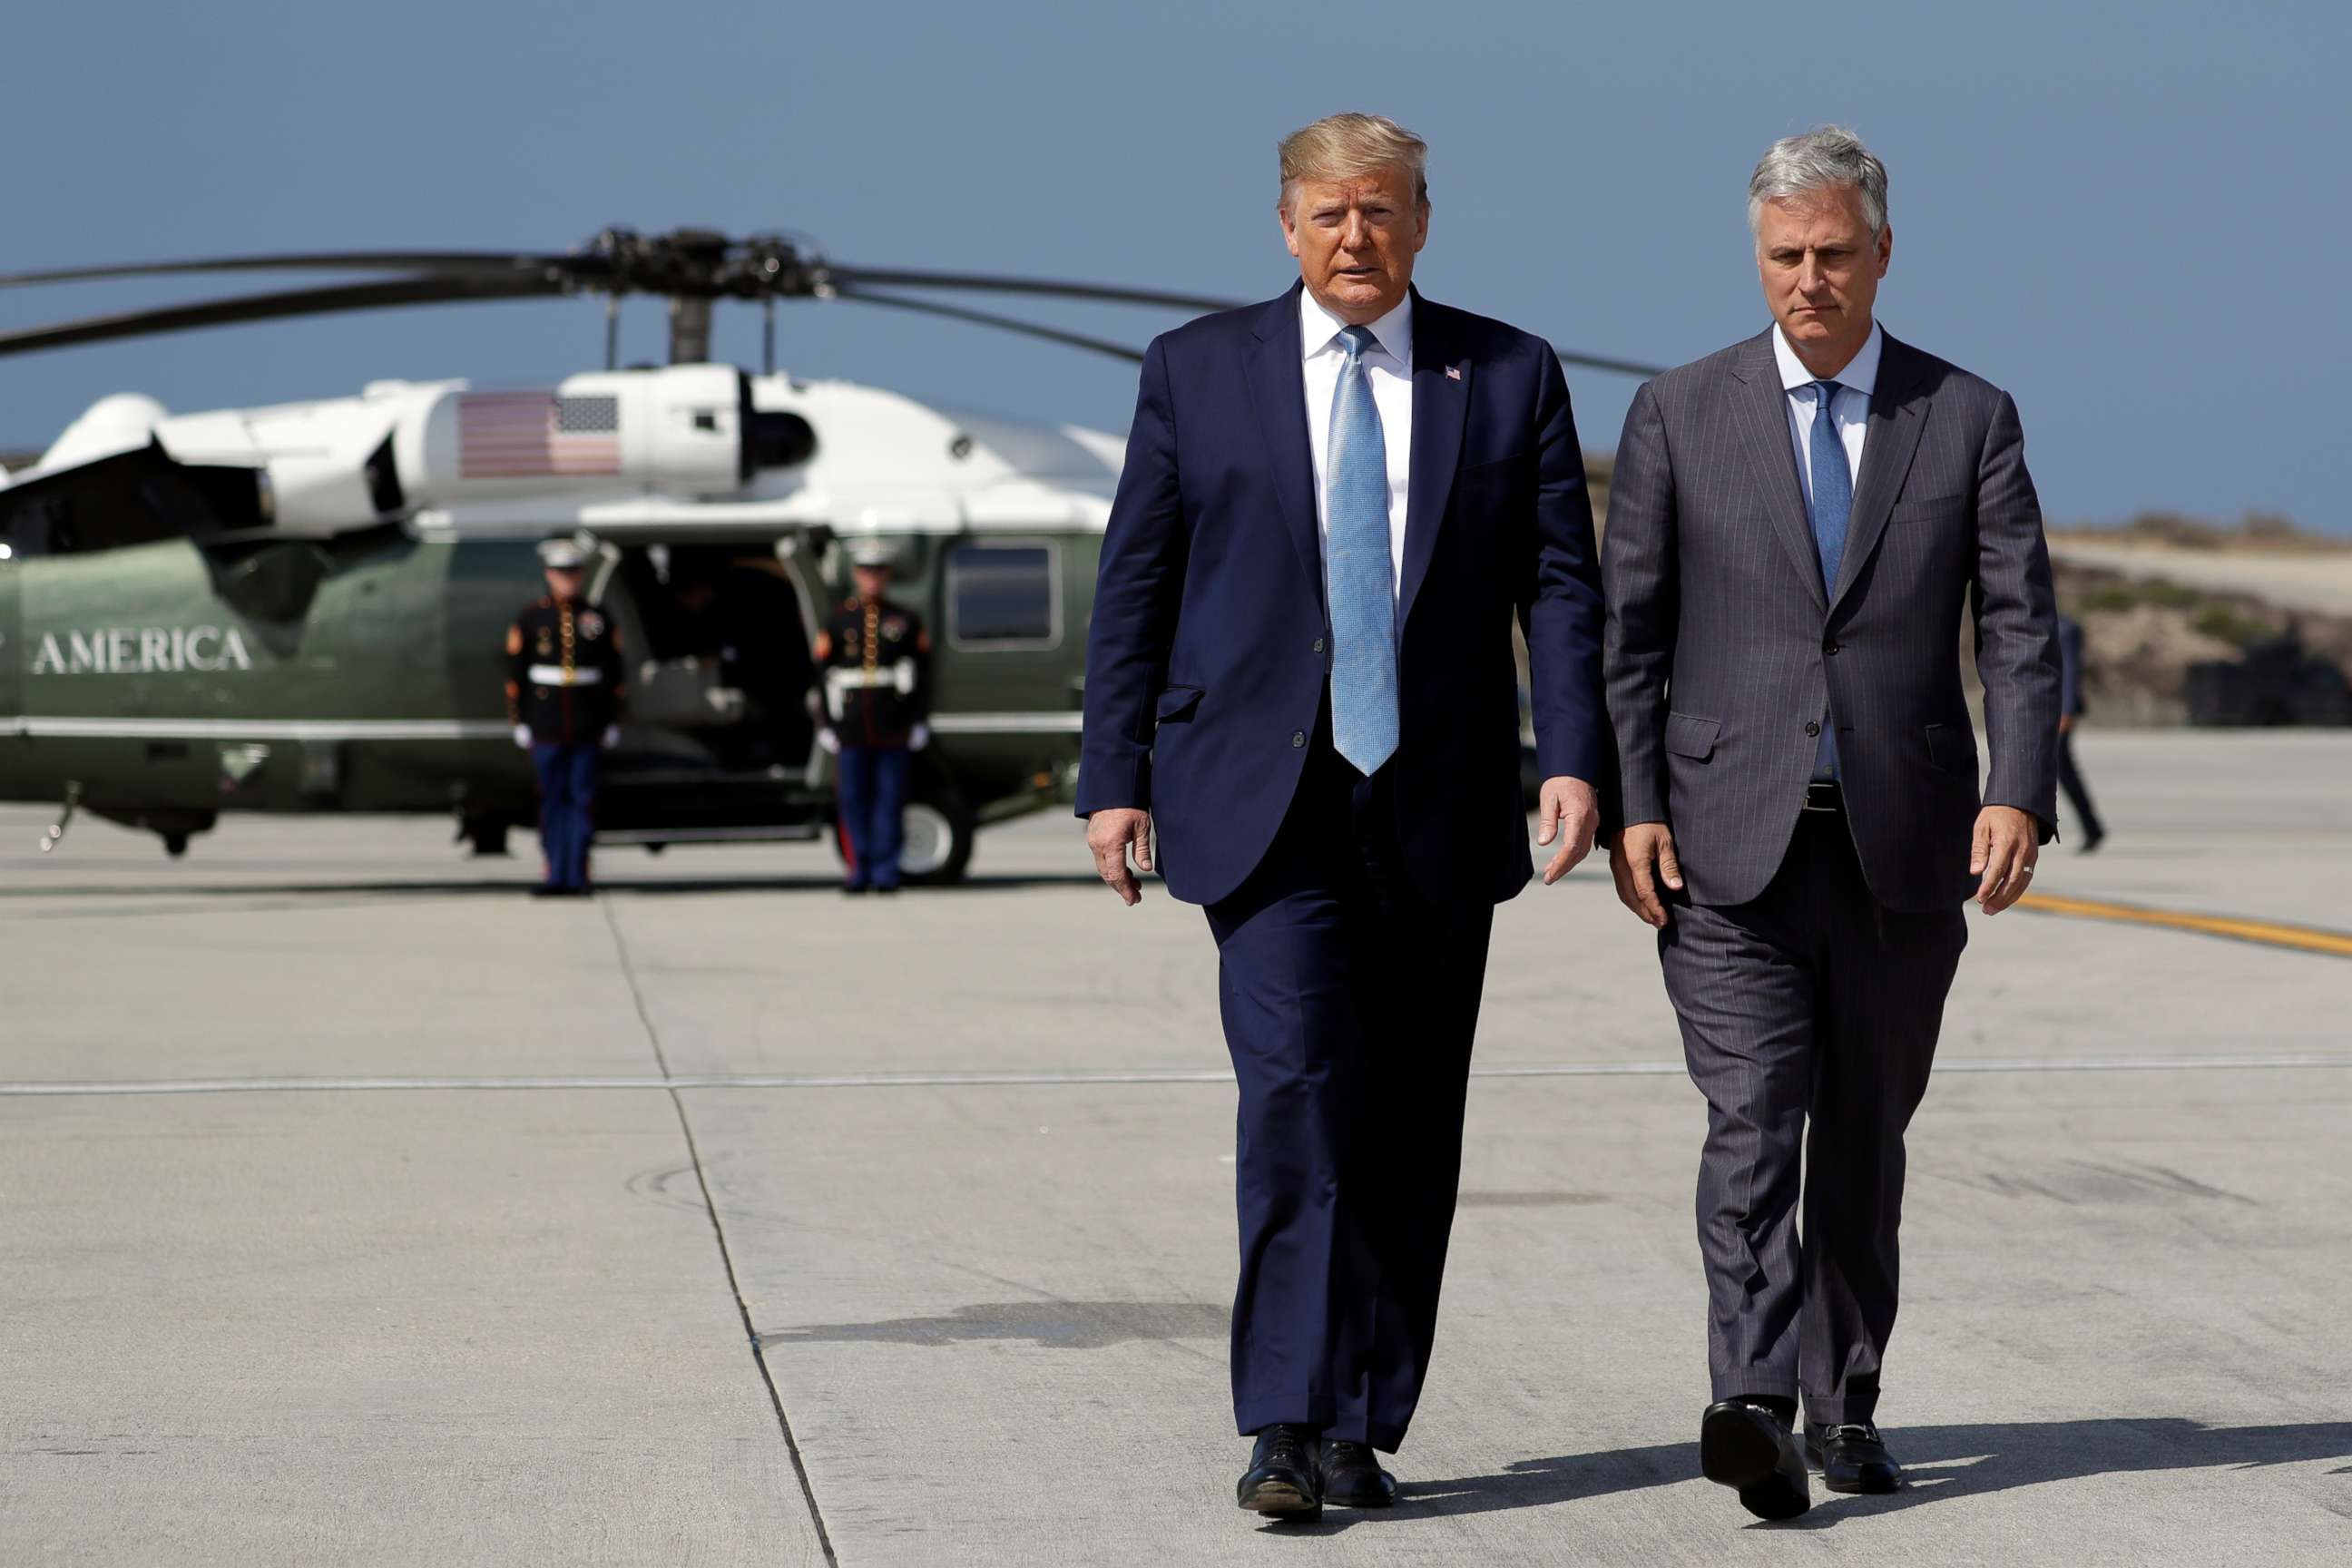 PHOTO: President Donald Trump and Robert O'Brien, just named as the new national security adviser, walk to speak to the media before boarding Air Force One at Los Angeles International Airport, Sept. 18, 2019, in Los Angeles.